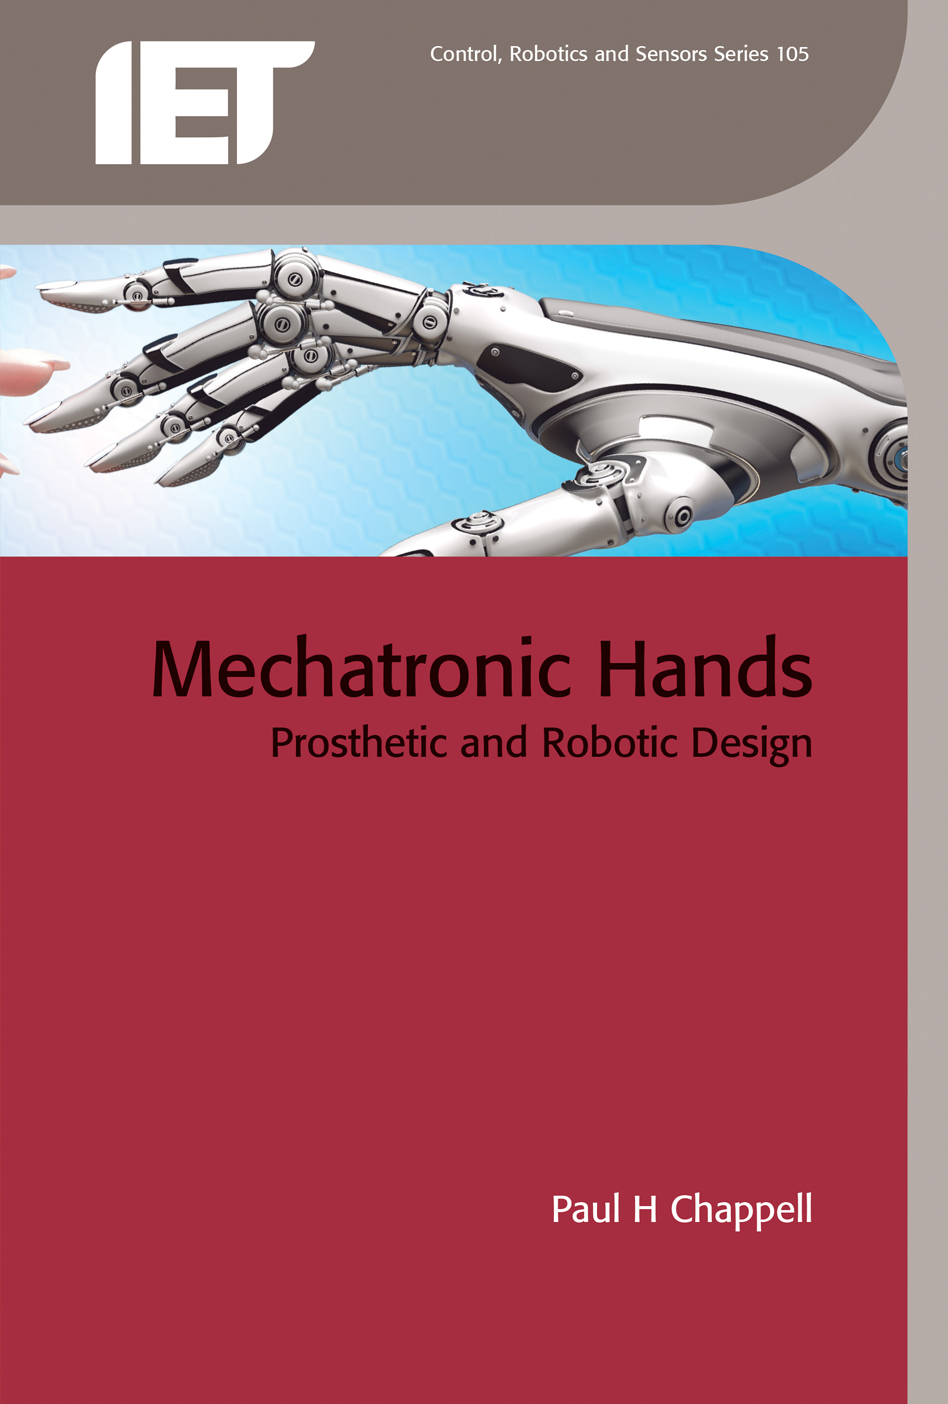 Mechatronic Hands, Prosthetic and robotic design